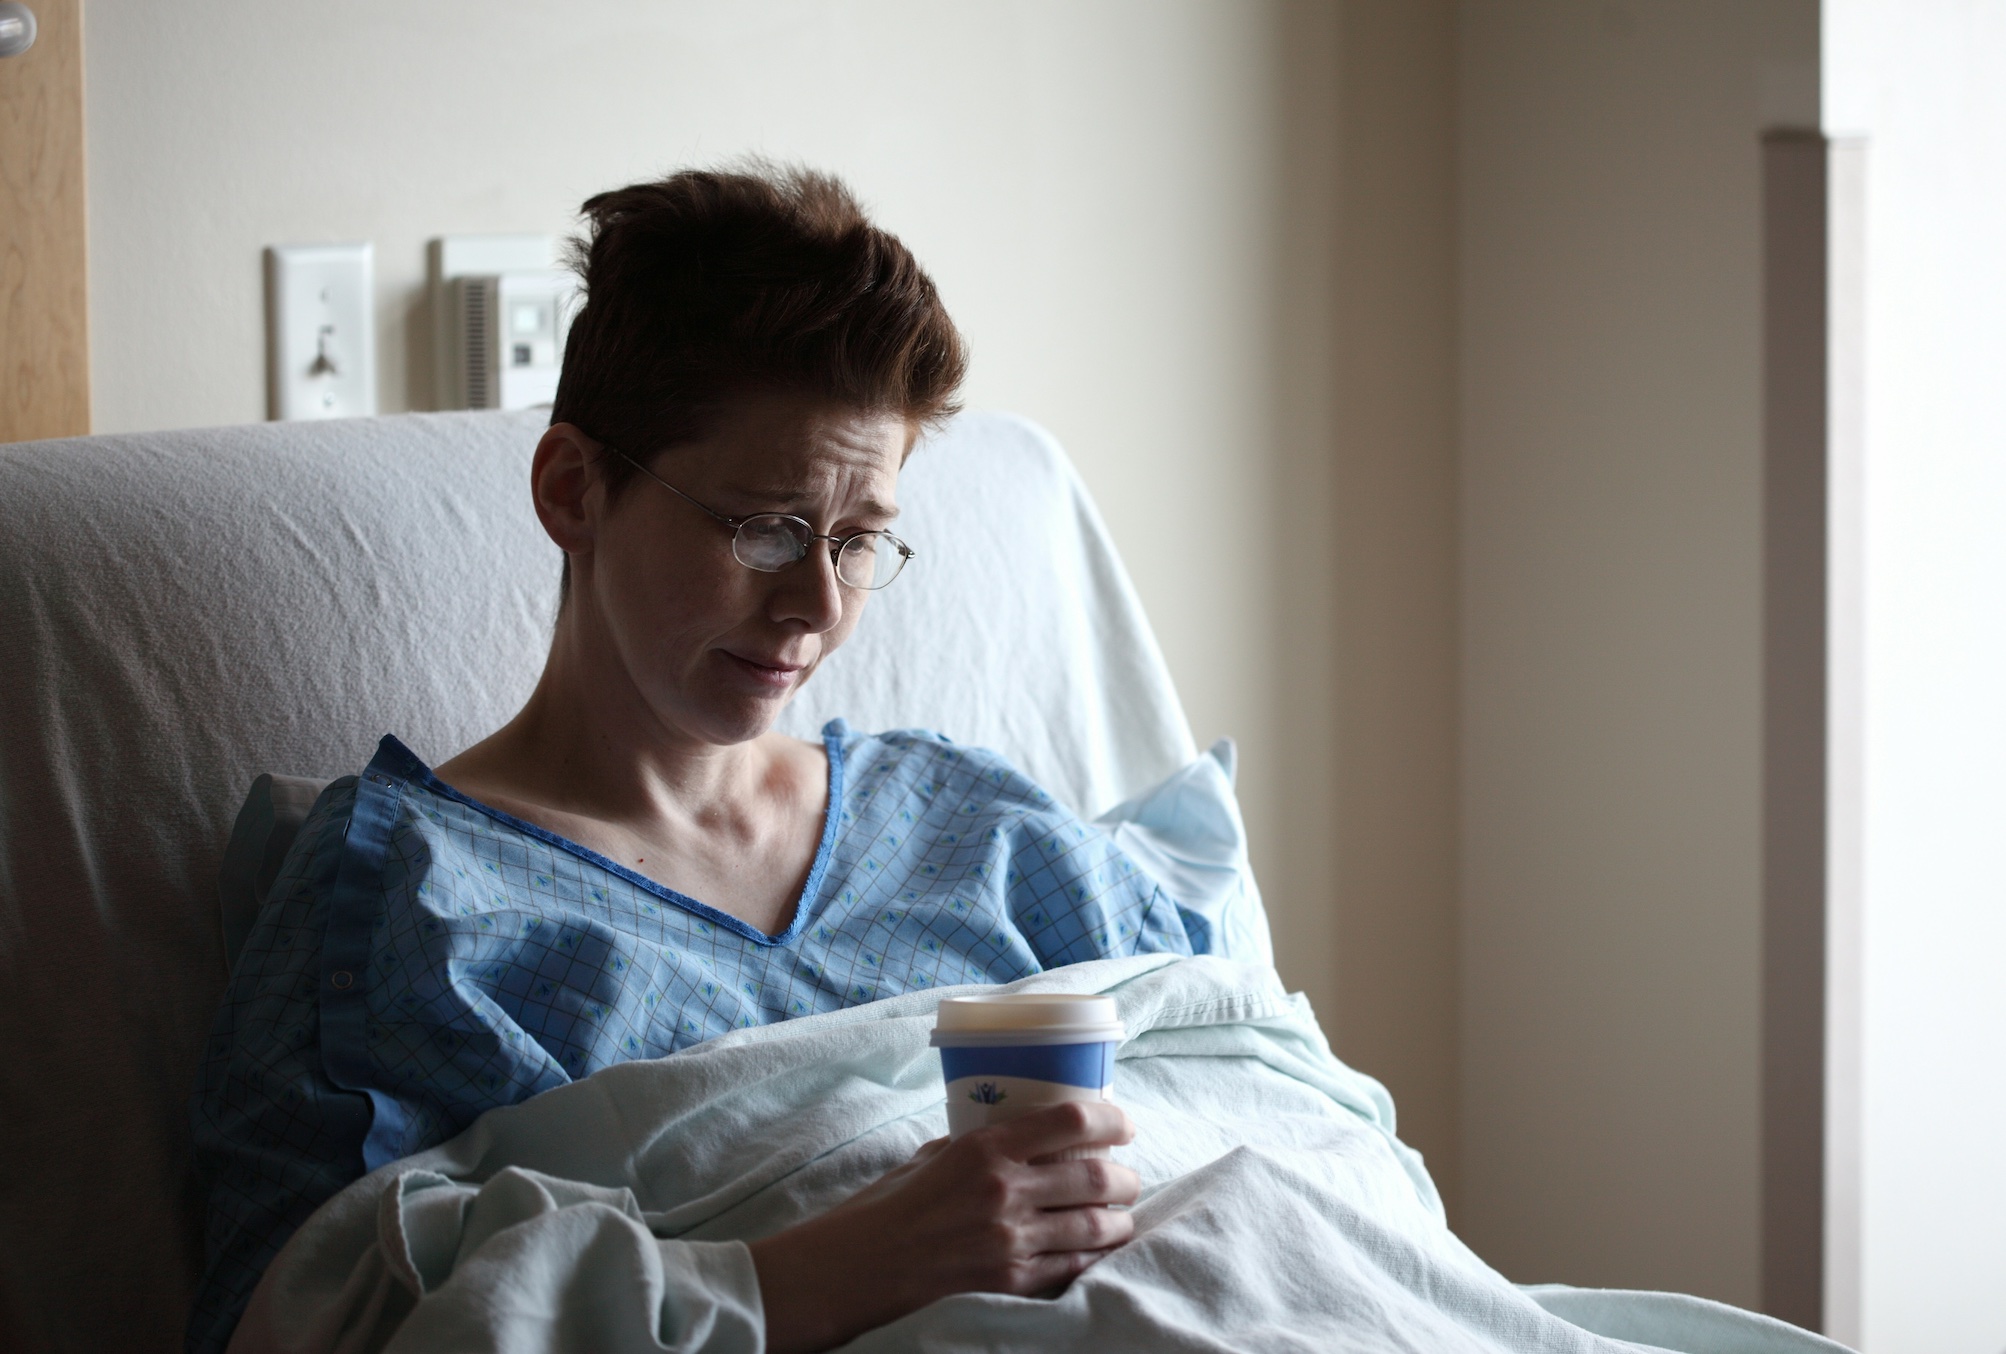 Woman in hospital bed with to go cup; image by Alexander Grey, via Unsplash.com.